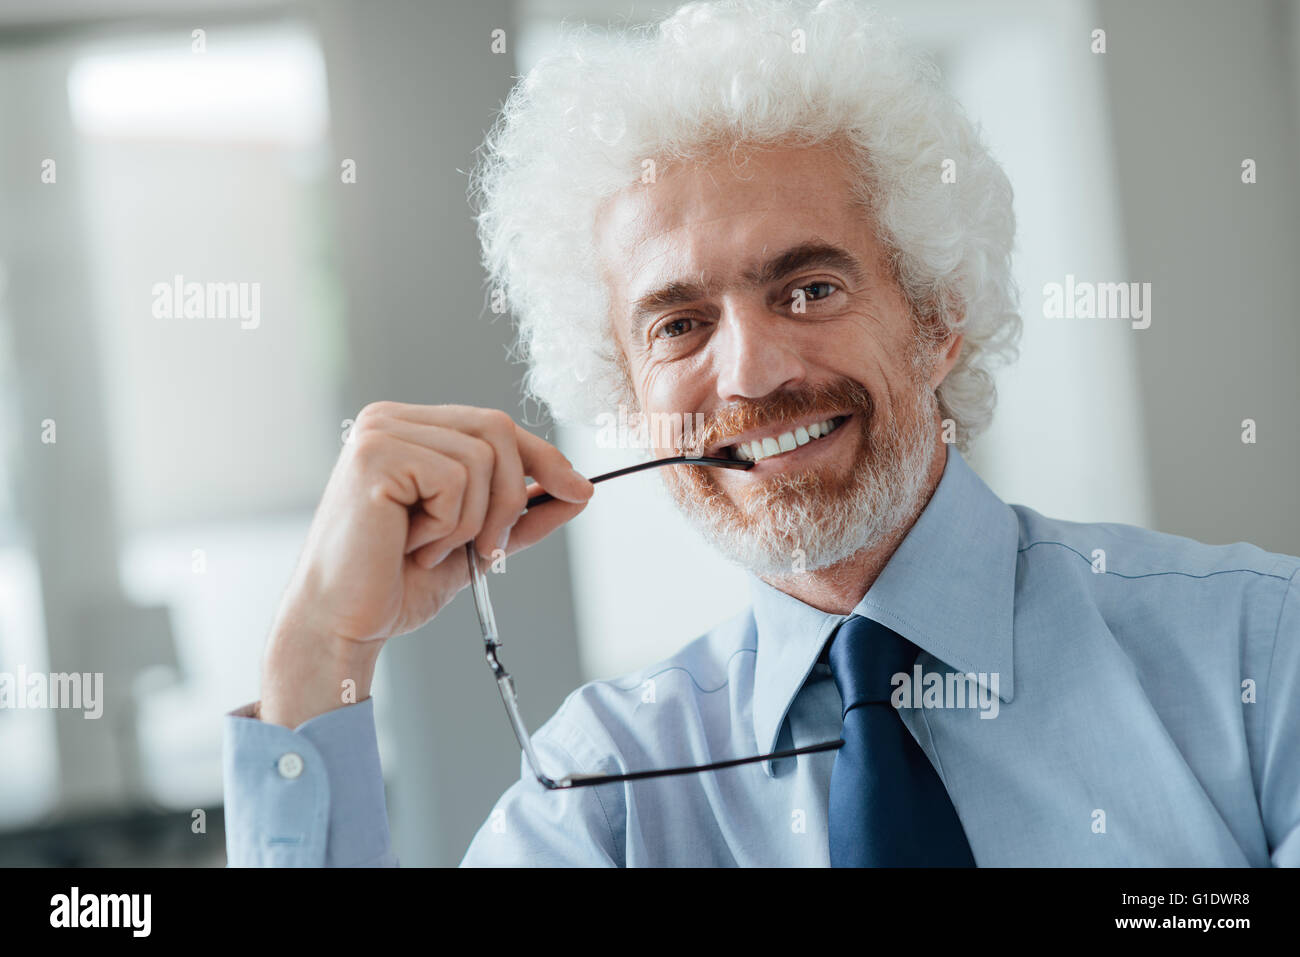 Cheerful businessman portrait, il est holding glasses and looking at camera Banque D'Images